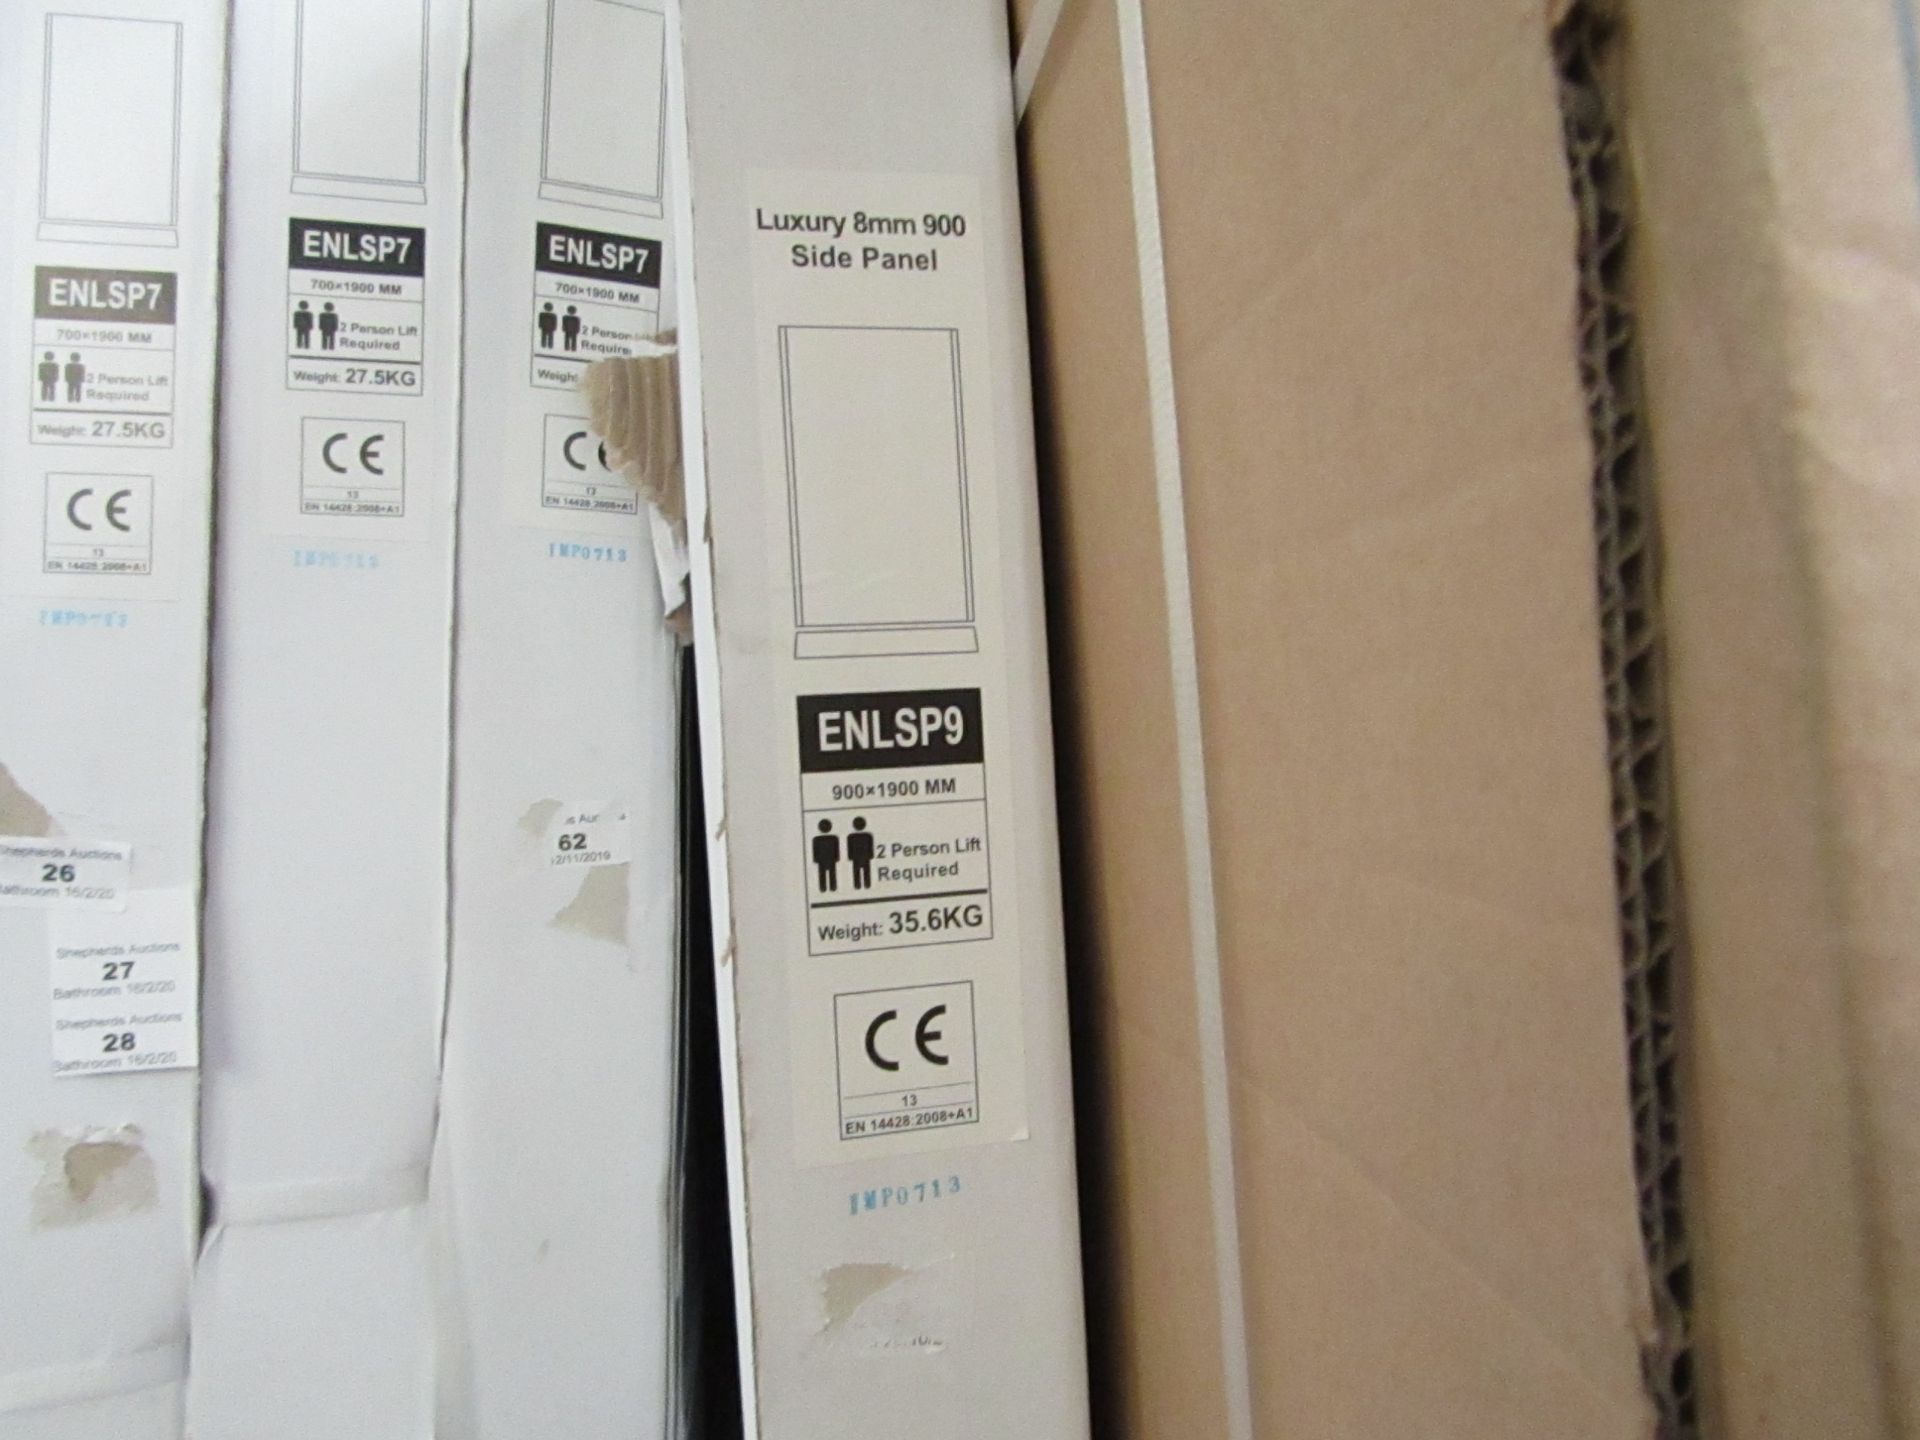 Luxury 8mm 900 Side panel ENLSP9, New and boxed.